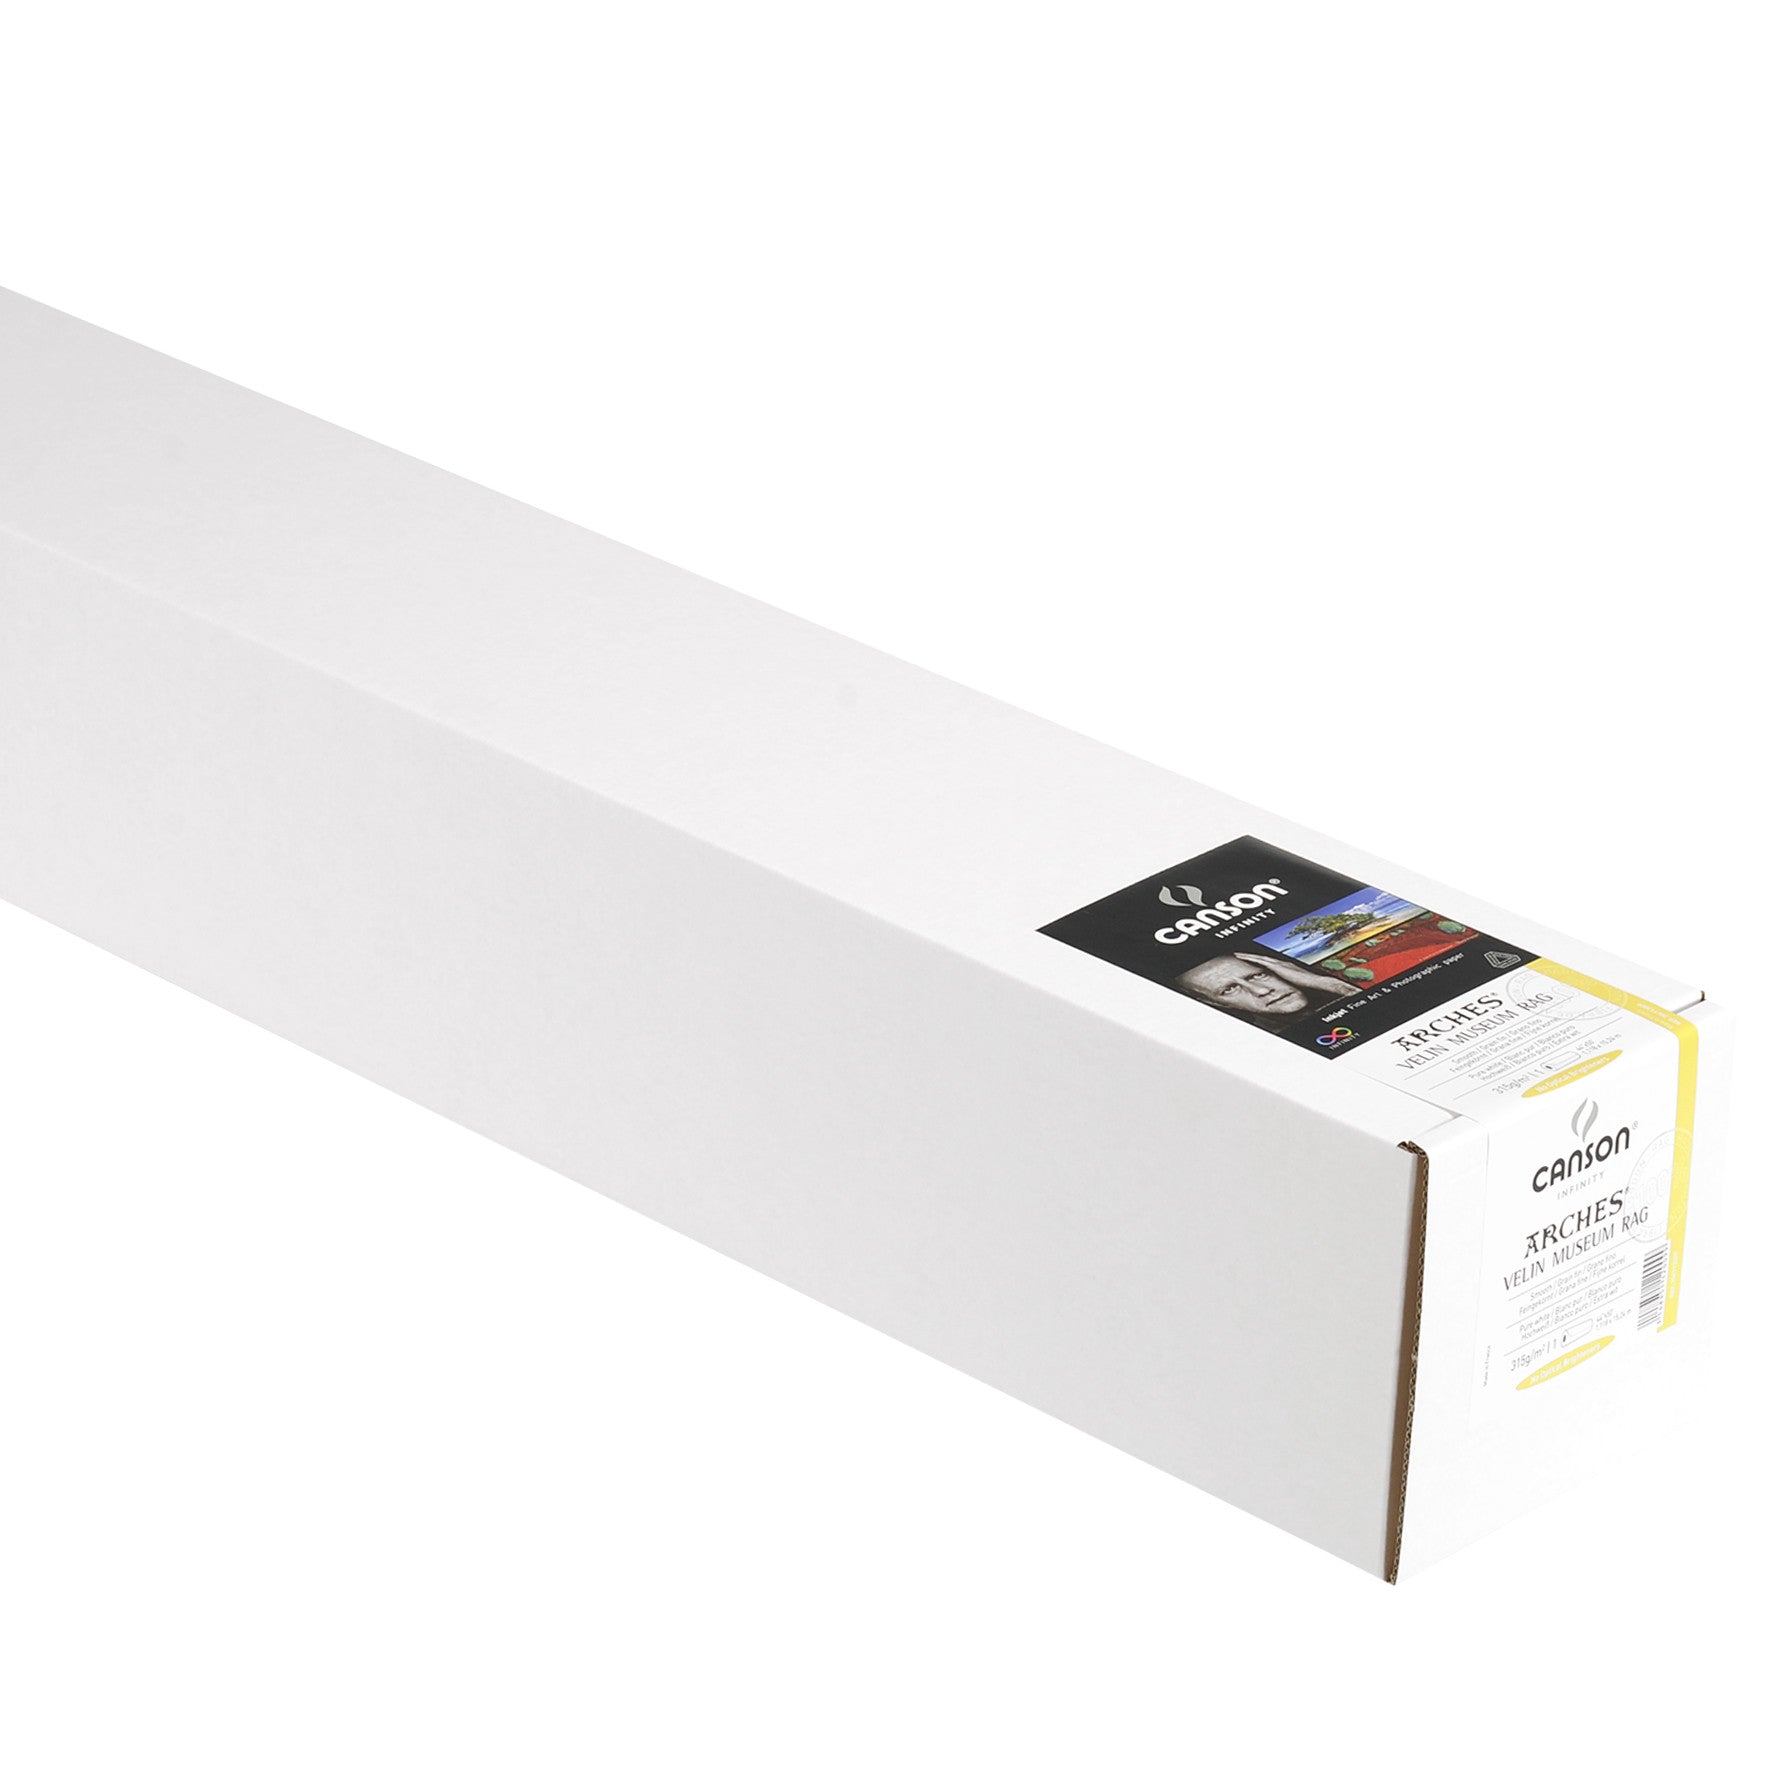 Canson Infinity Velin Museum Rag - 315gsm - 44"x50' roll - Wall Your Photos